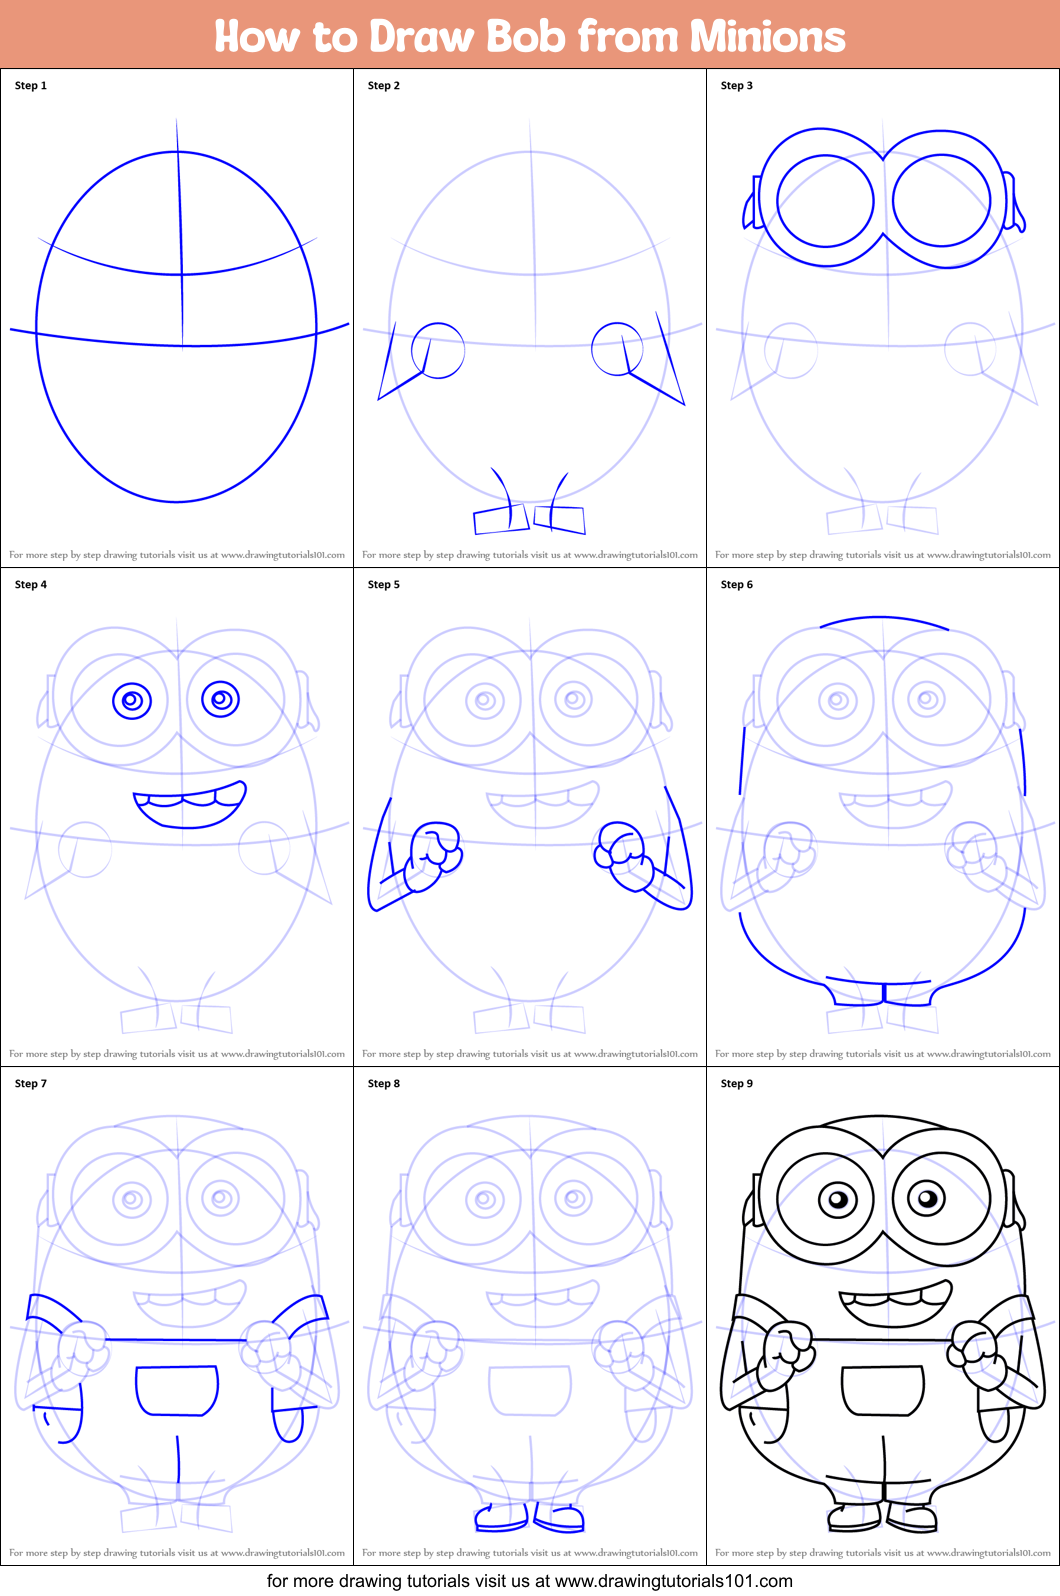 How to Draw Bob from Minions printable step by step drawing sheet